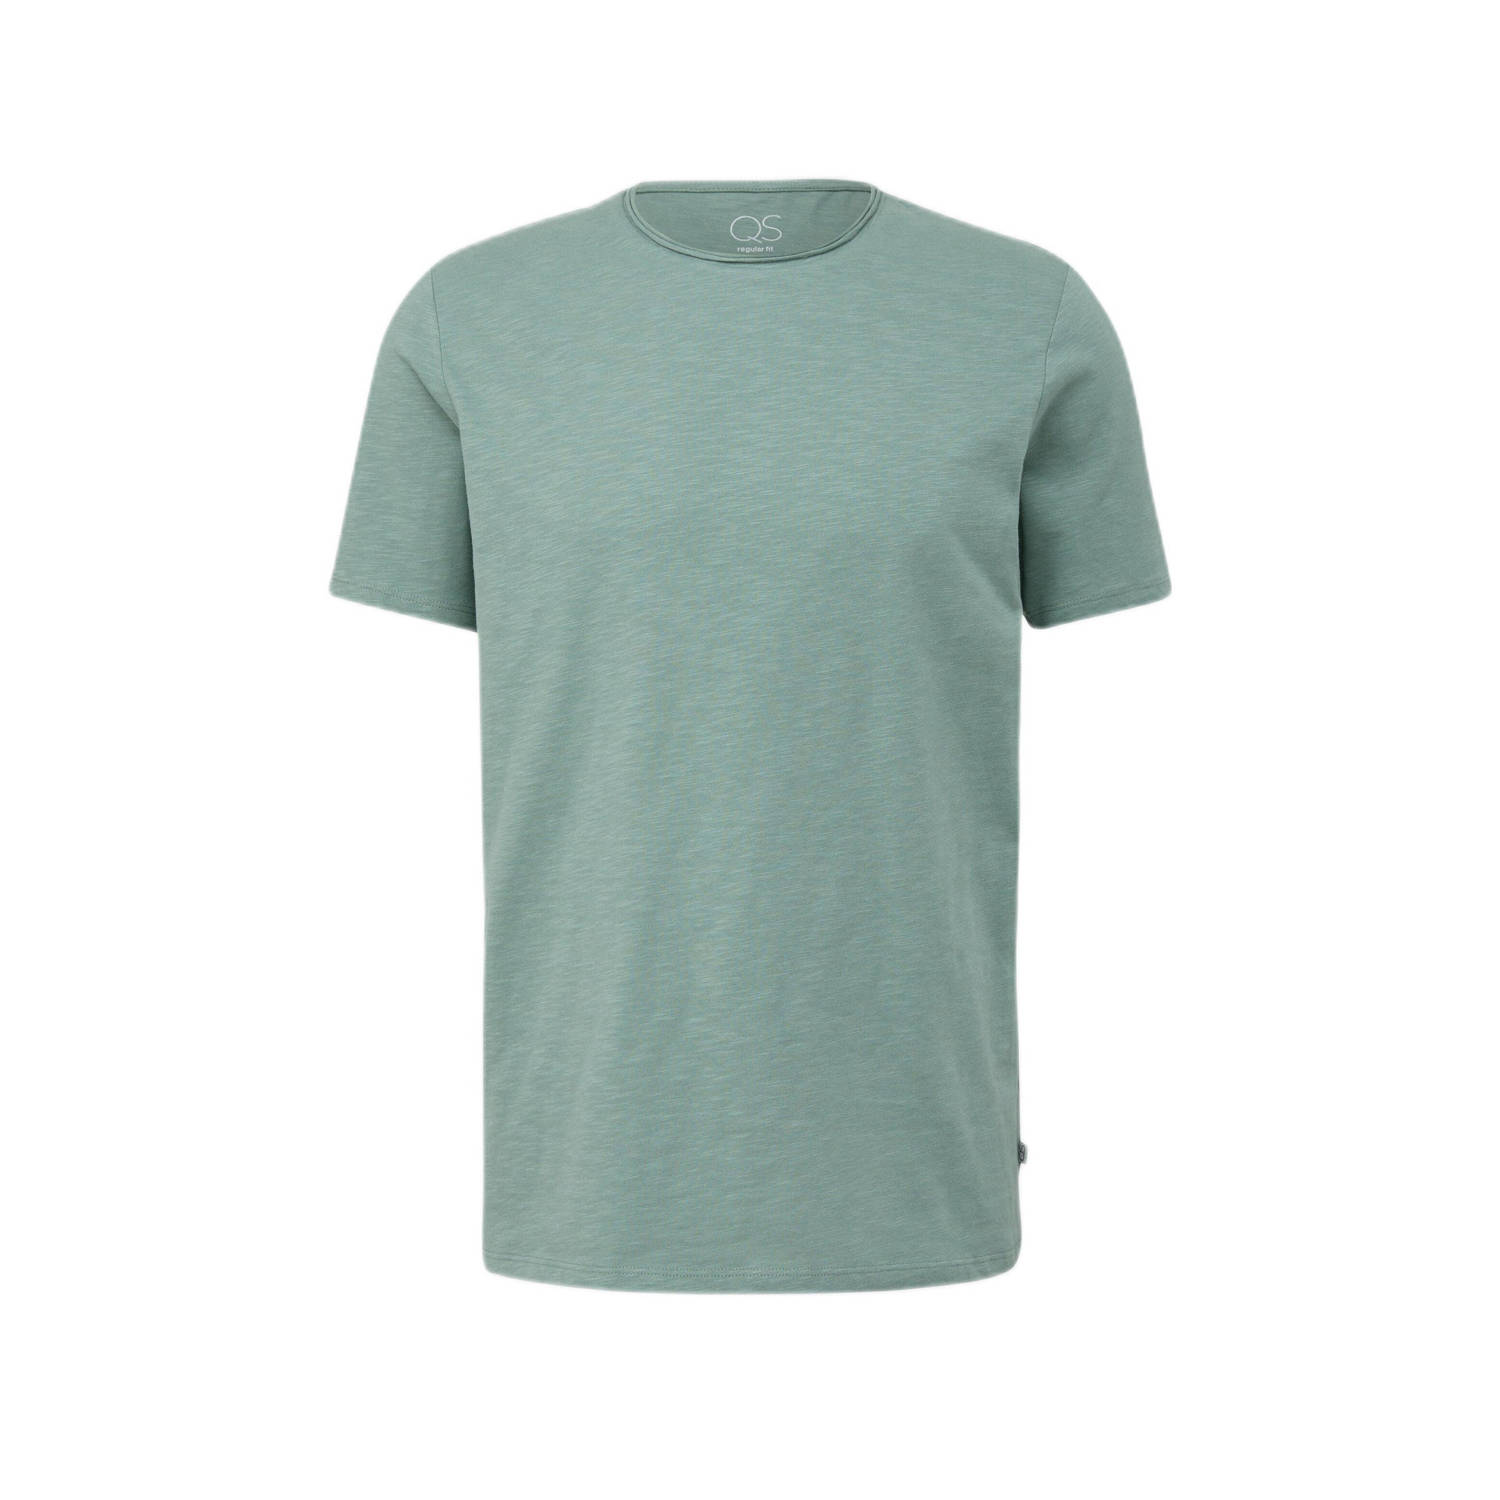 Q S by s.Oliver regular fit T-shirt groen